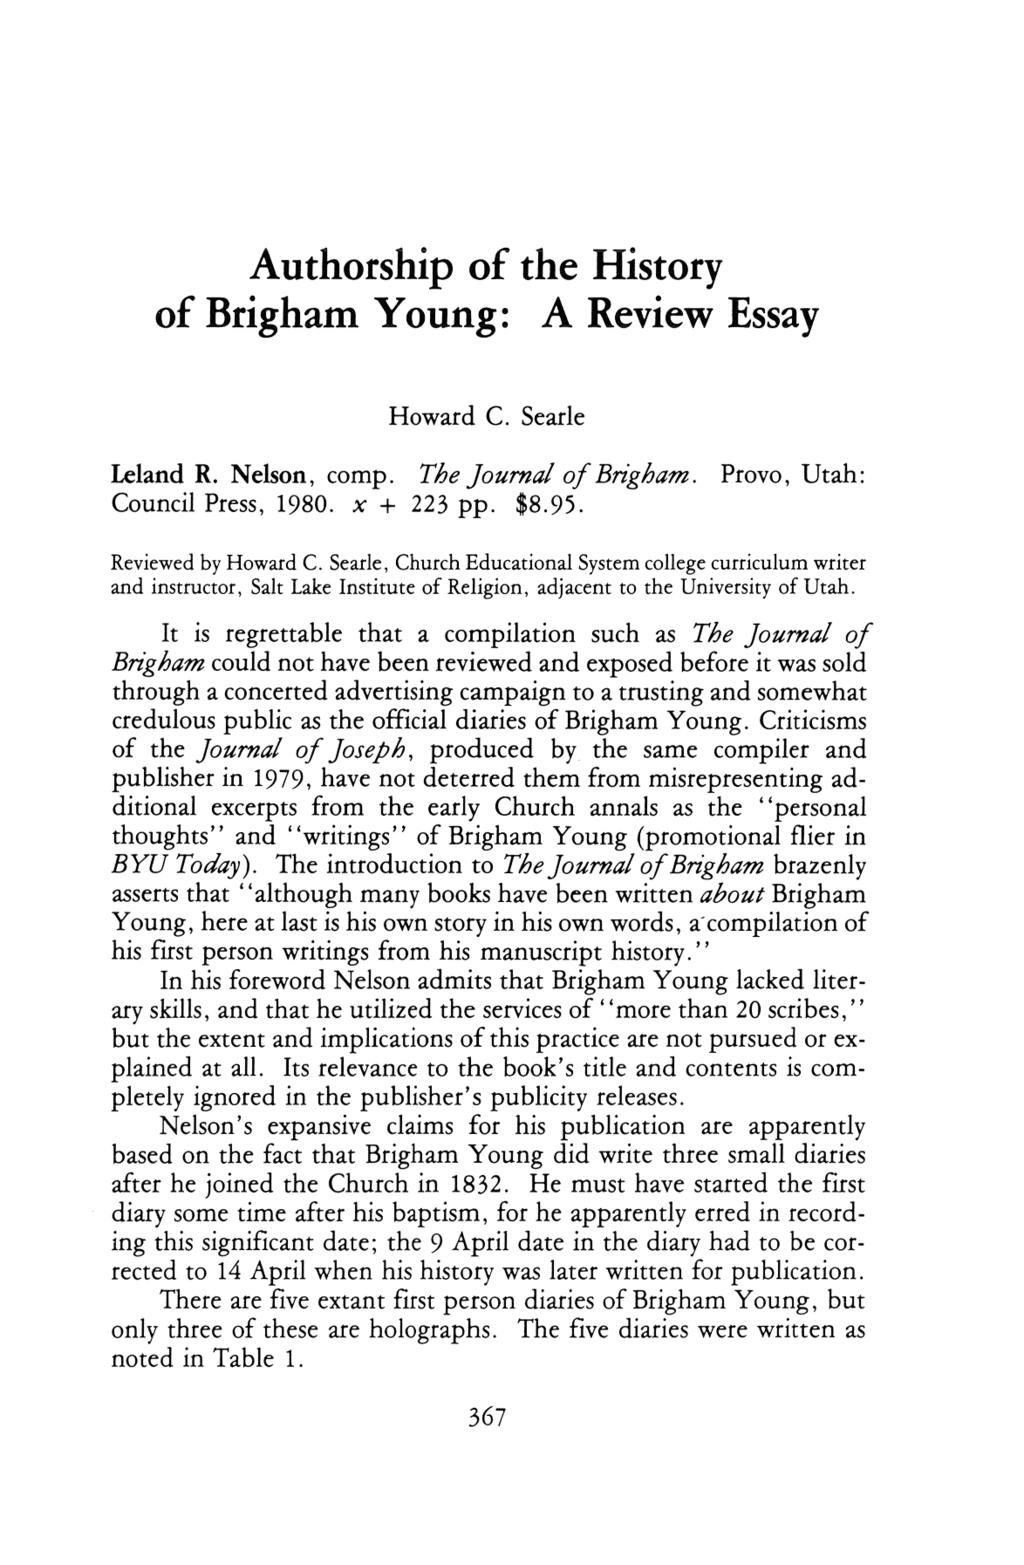 Searle: Authorship of the History of Brigham Young: A Review Essay authorship of the history of brigham young A review essay howard C searle leland R nelson comp the journal of brigham provo utah